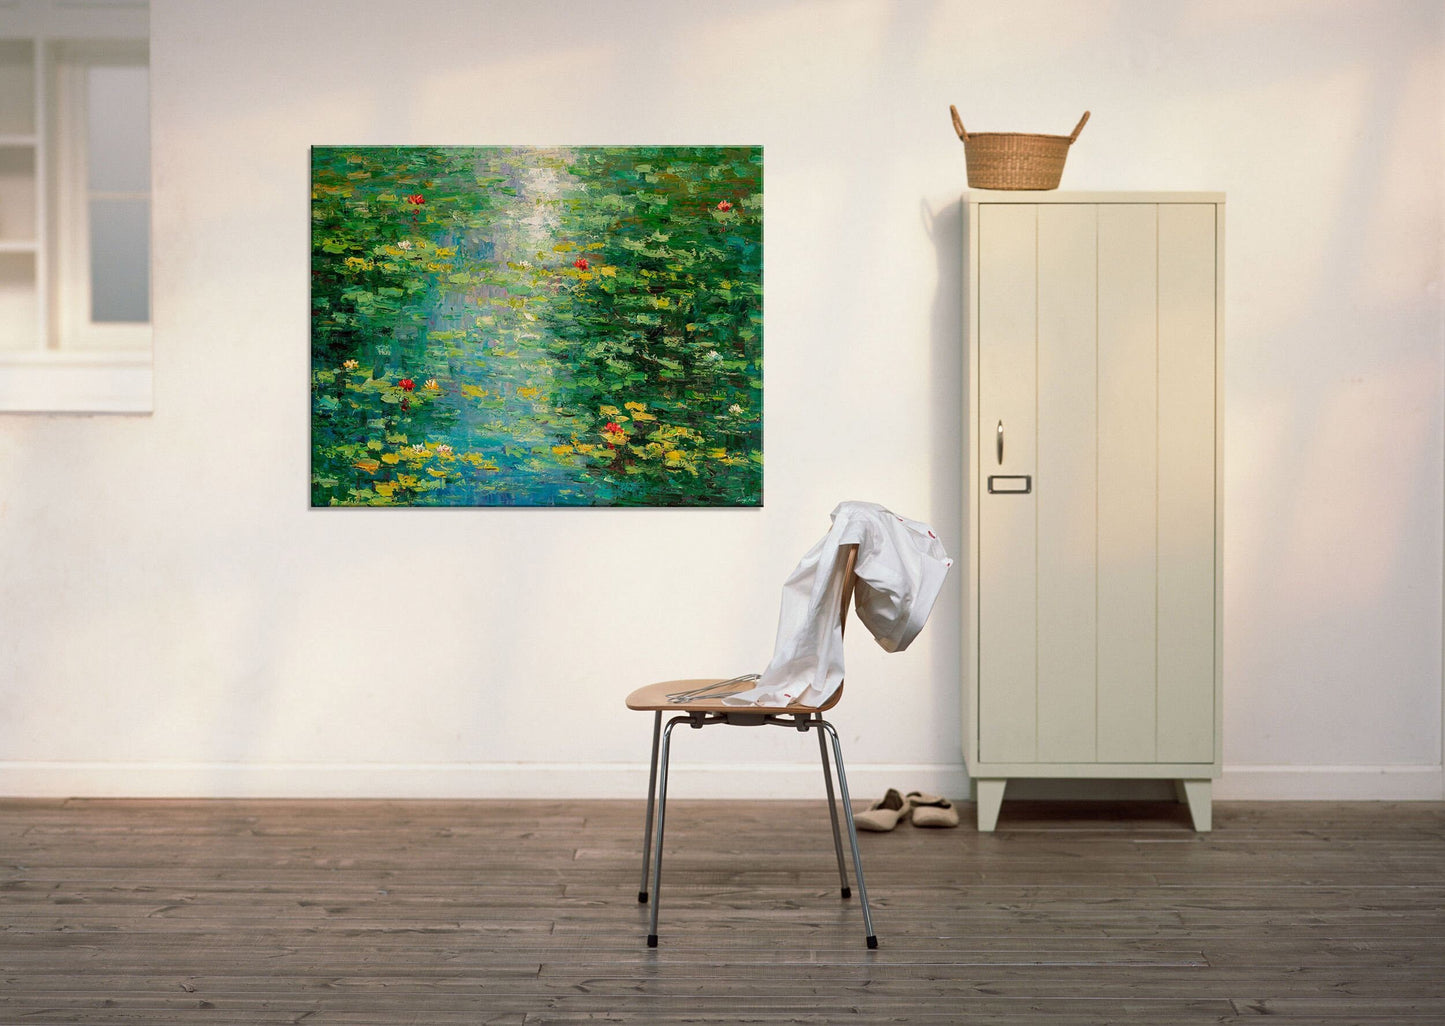 Experience the beauty of Spring with this Large Wall Art Oil Painting of Waterlilies Pond by George Miller, a colorful addition to any room